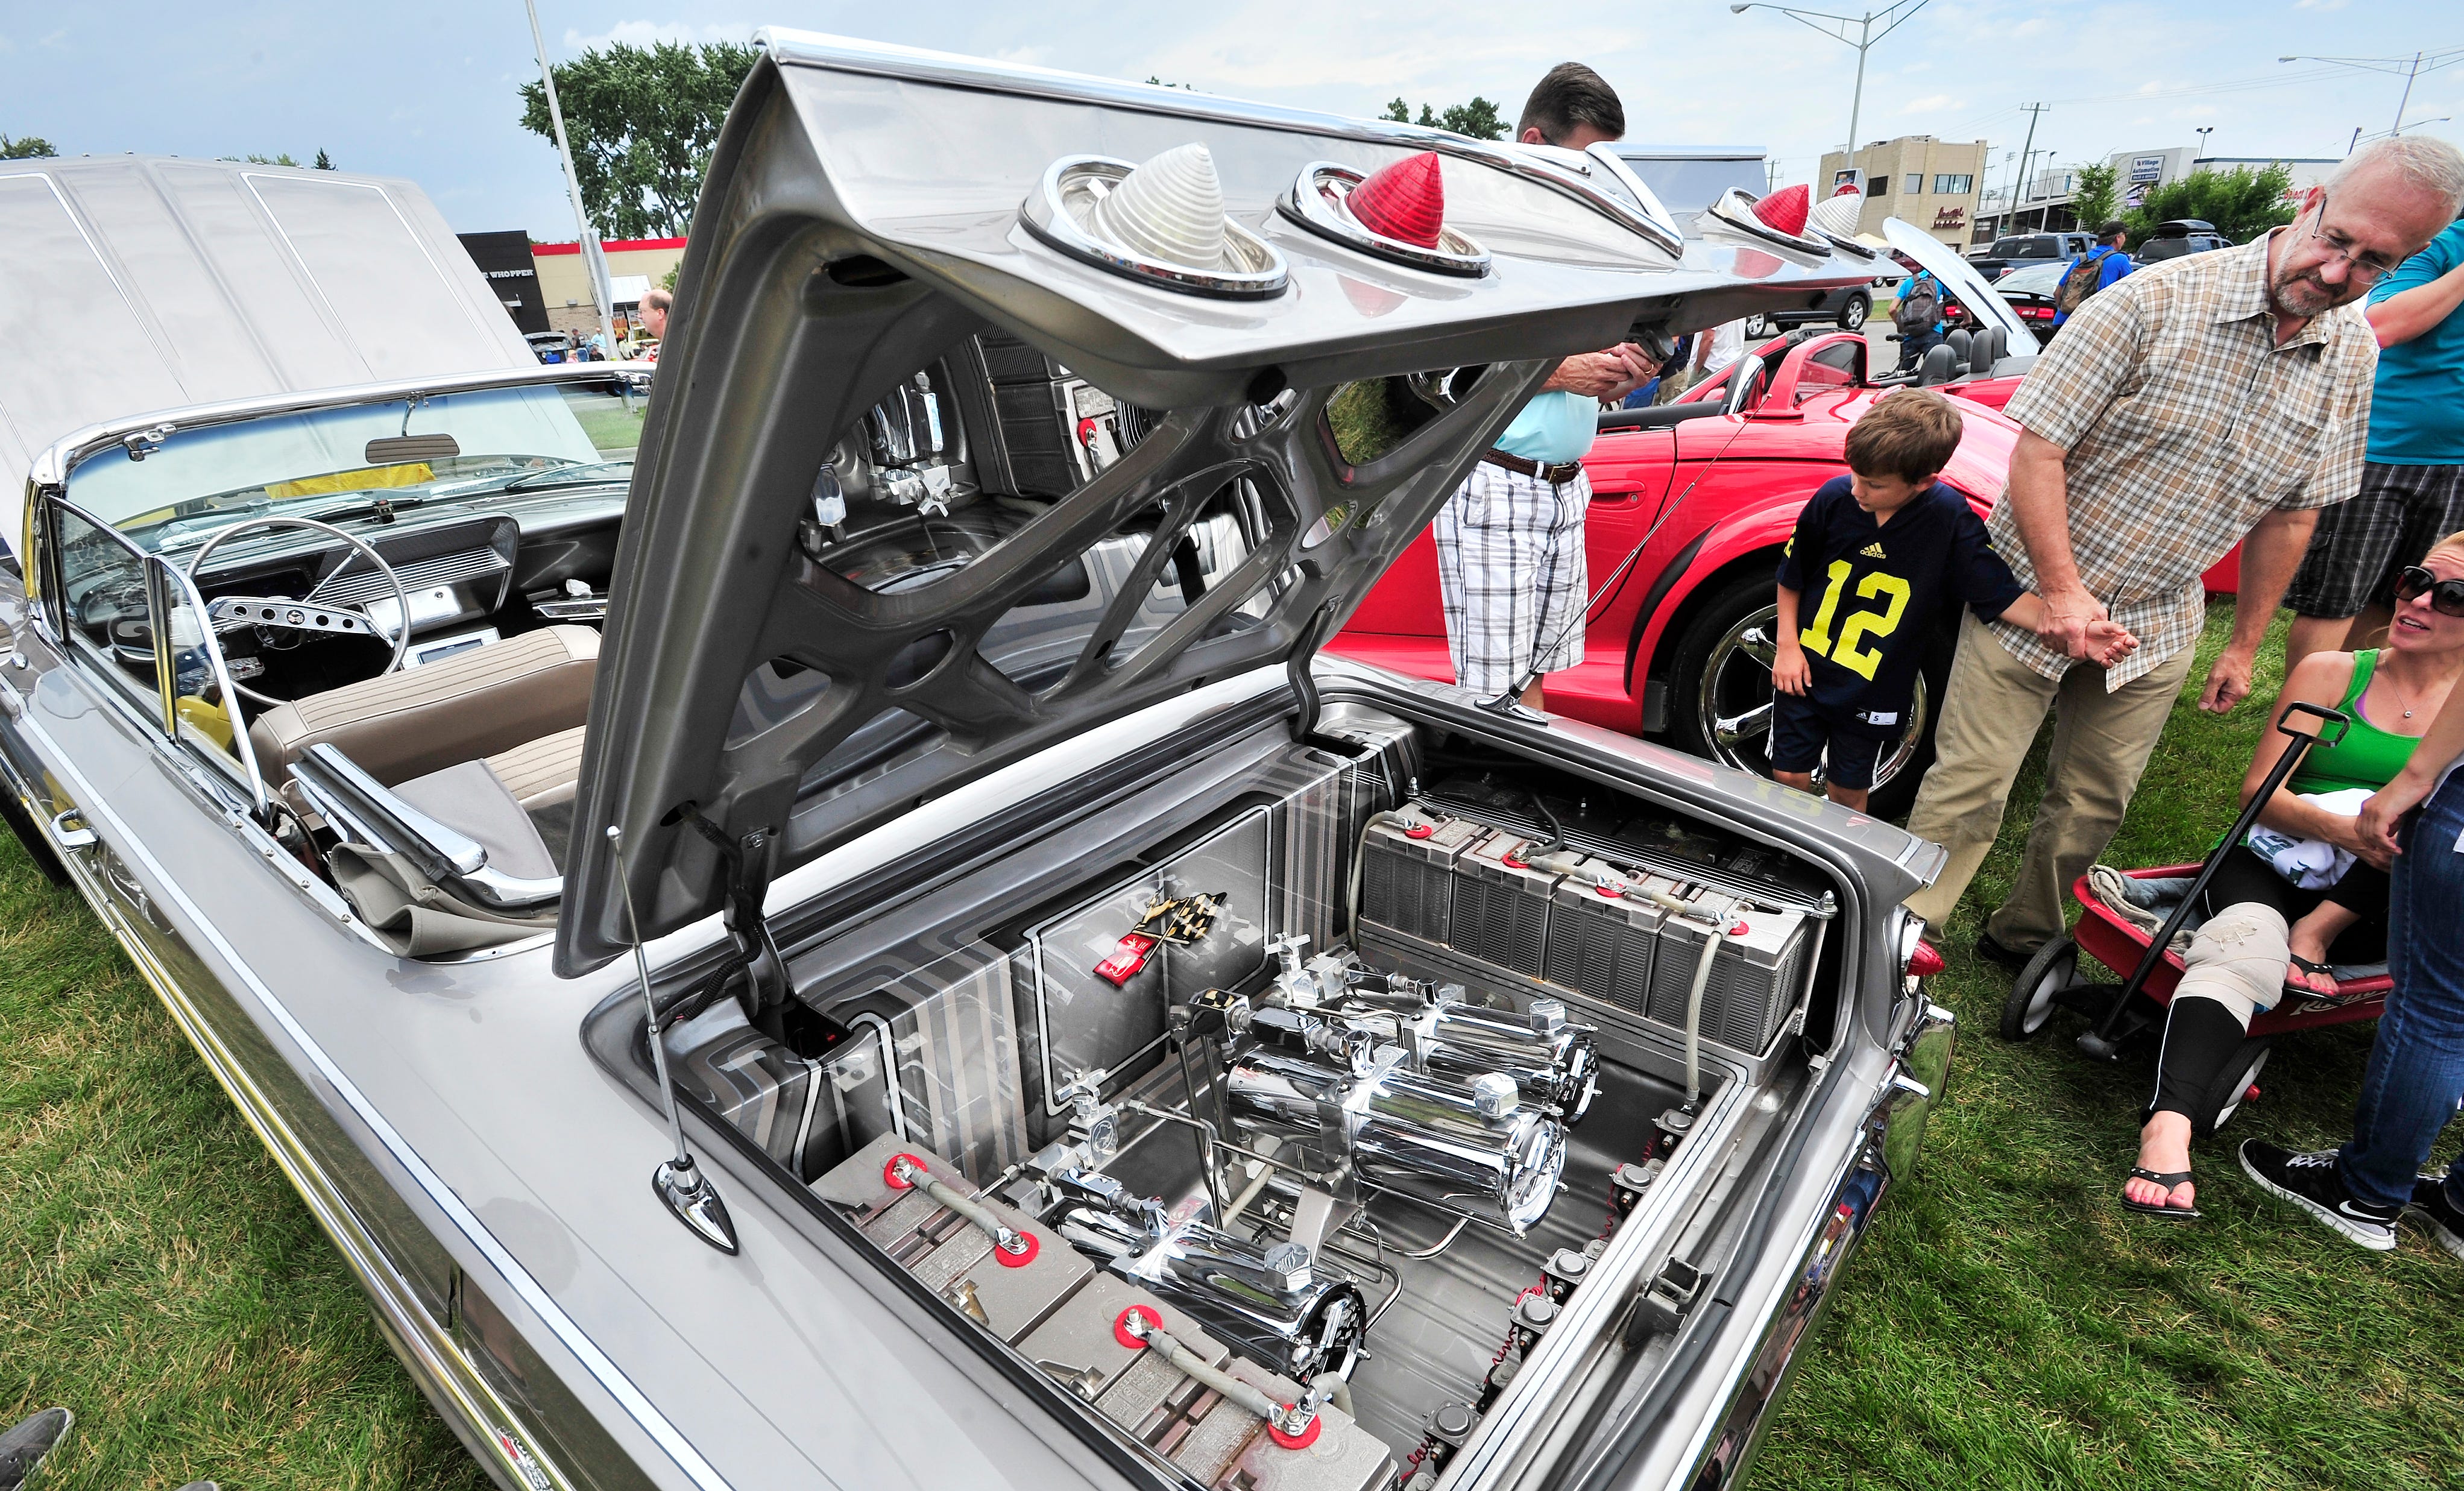 An open trunk of an Impala with batteries and hydraulics draws stares. "A '61 amazing Impala" says Daniel Zaid as he looks over the spotless, chromed-out engine during the Woodward Dream Cruise in Royal Oak, Aug. 16, 2014.